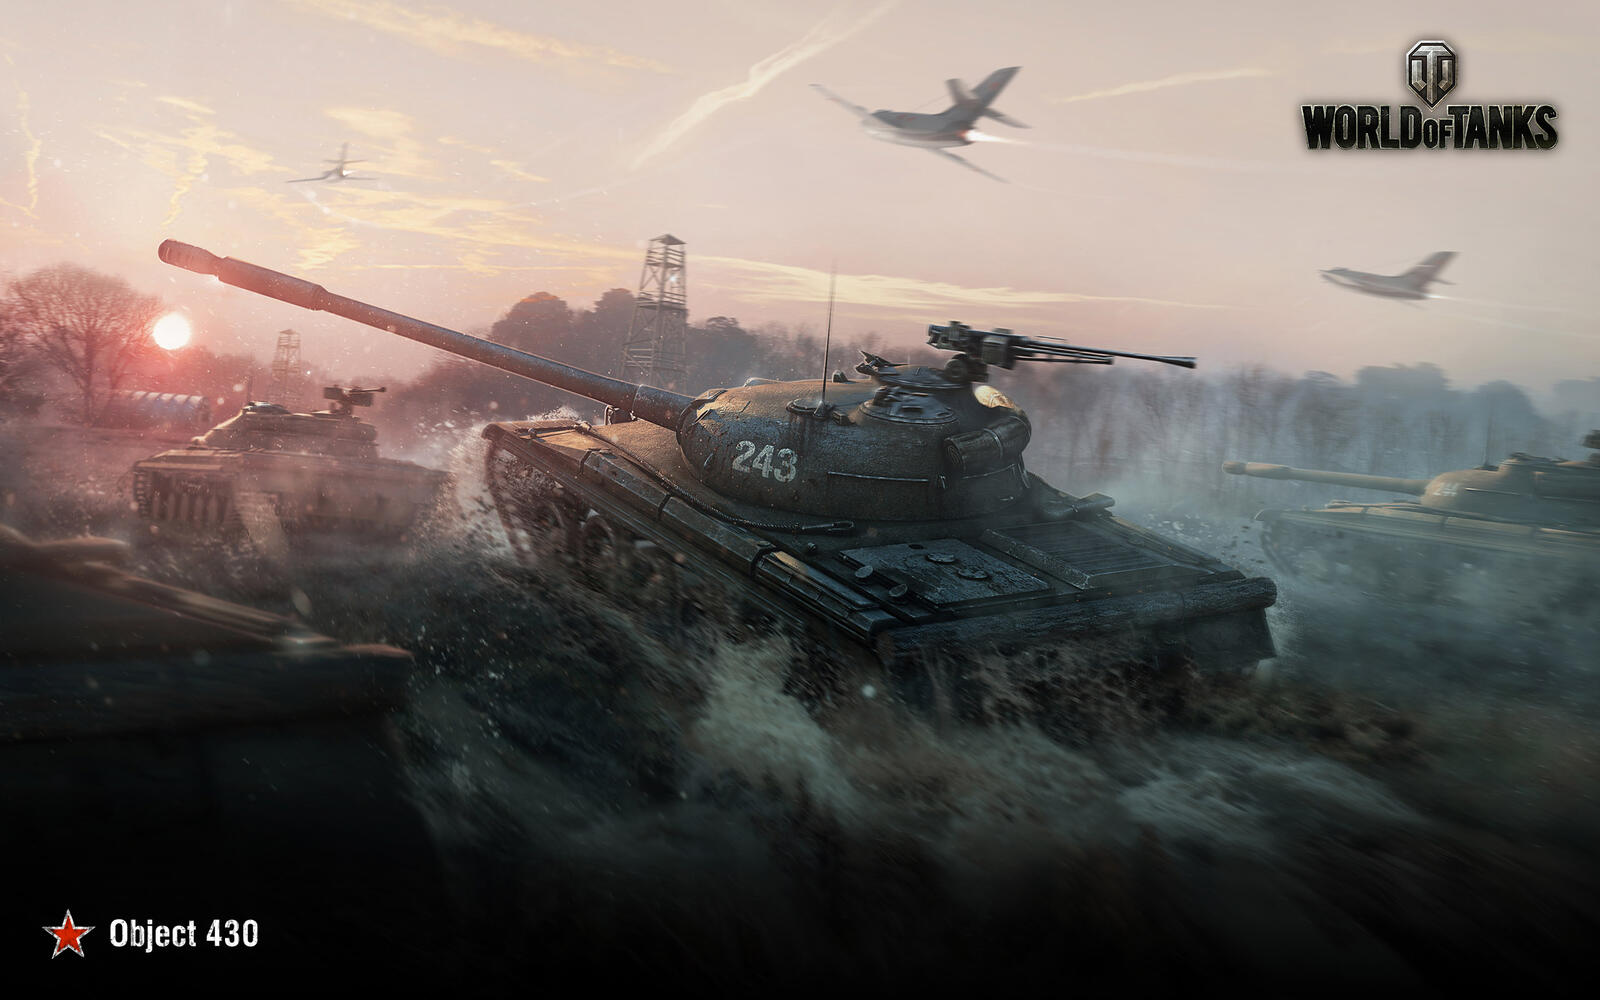 Wallpapers world of tanks PS4 games Xbox games on the desktop